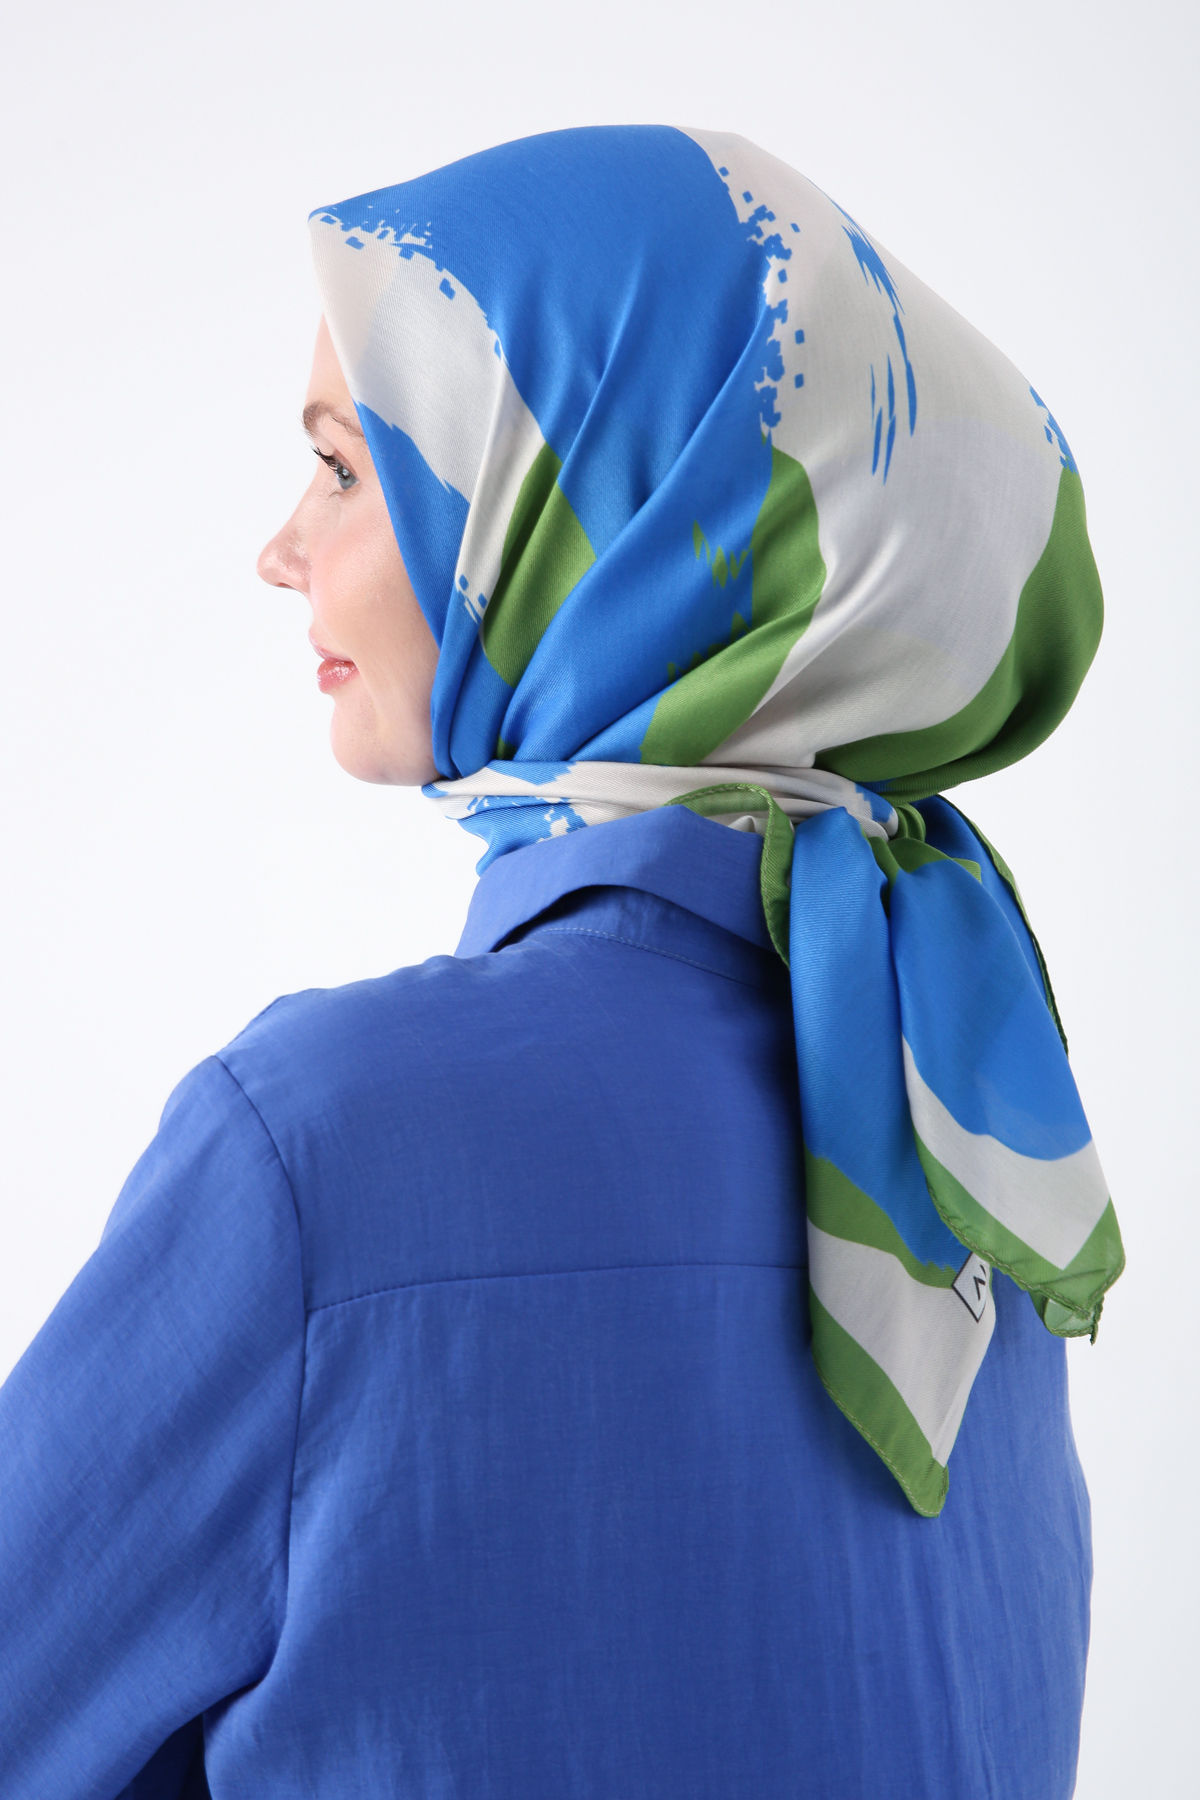 A model wears ALL10730 - Scarf - Green, wholesale Scarf of Allday to display at Lonca